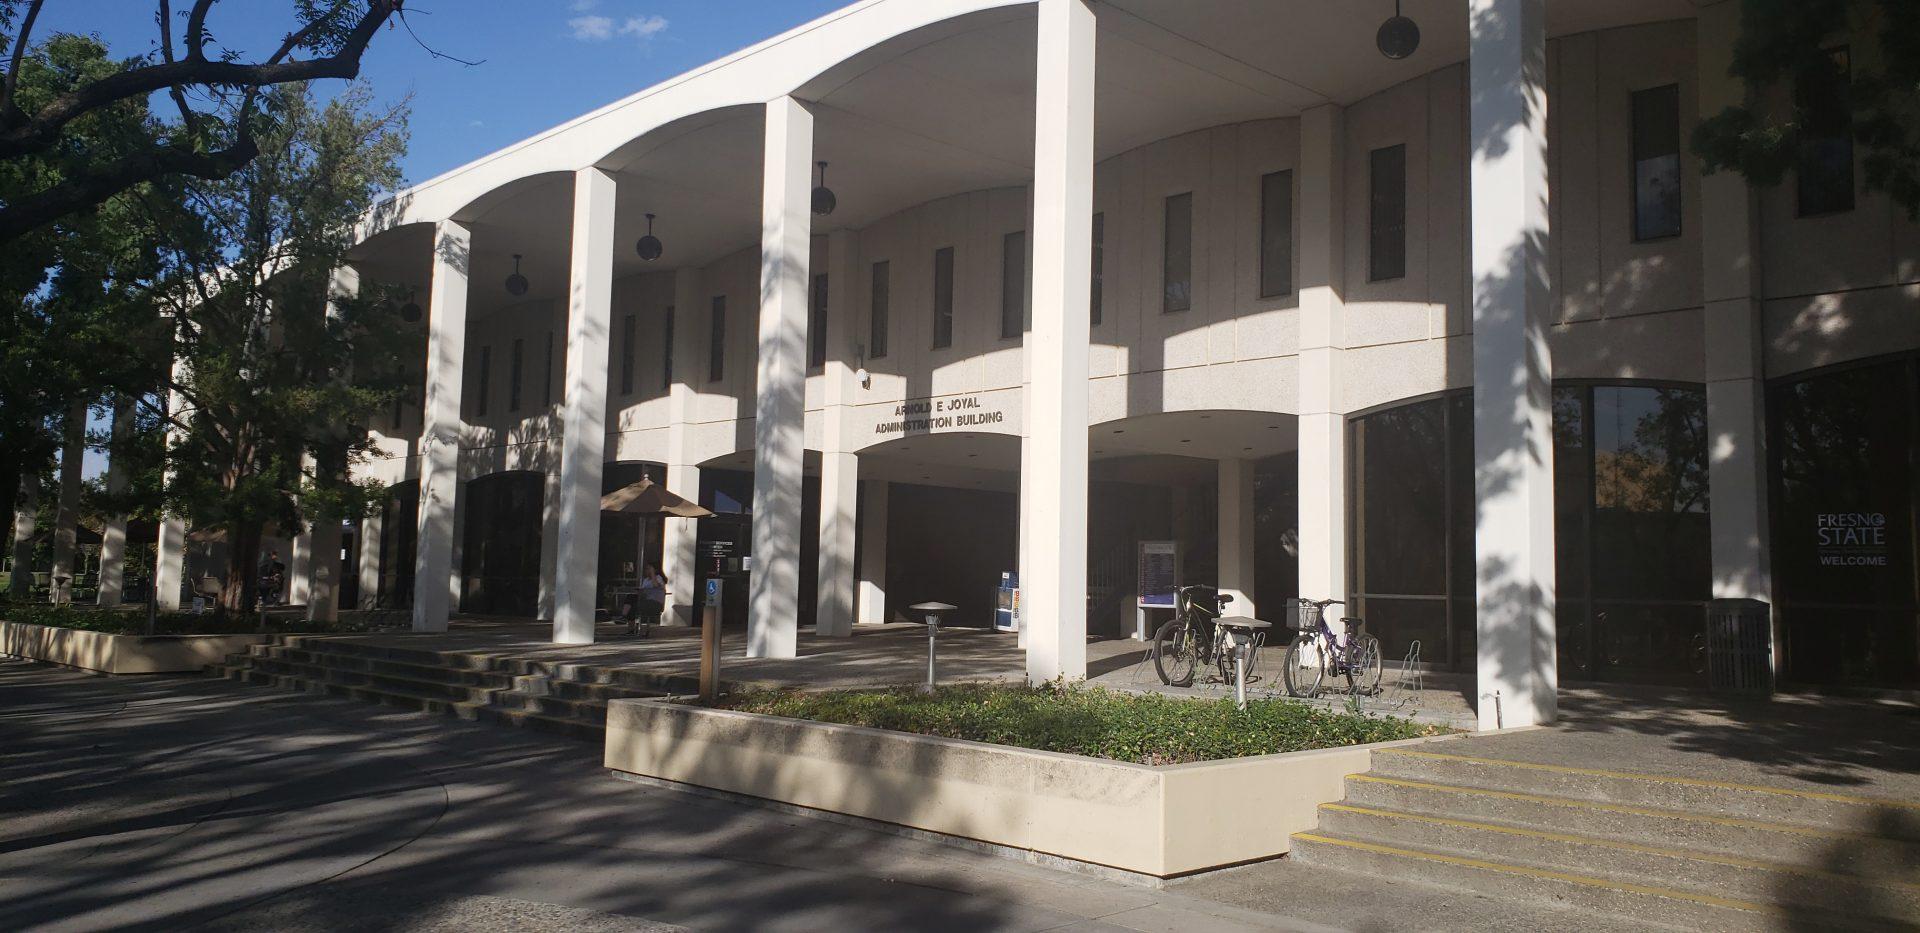 The Joyal Administration Building at Fresno State. 